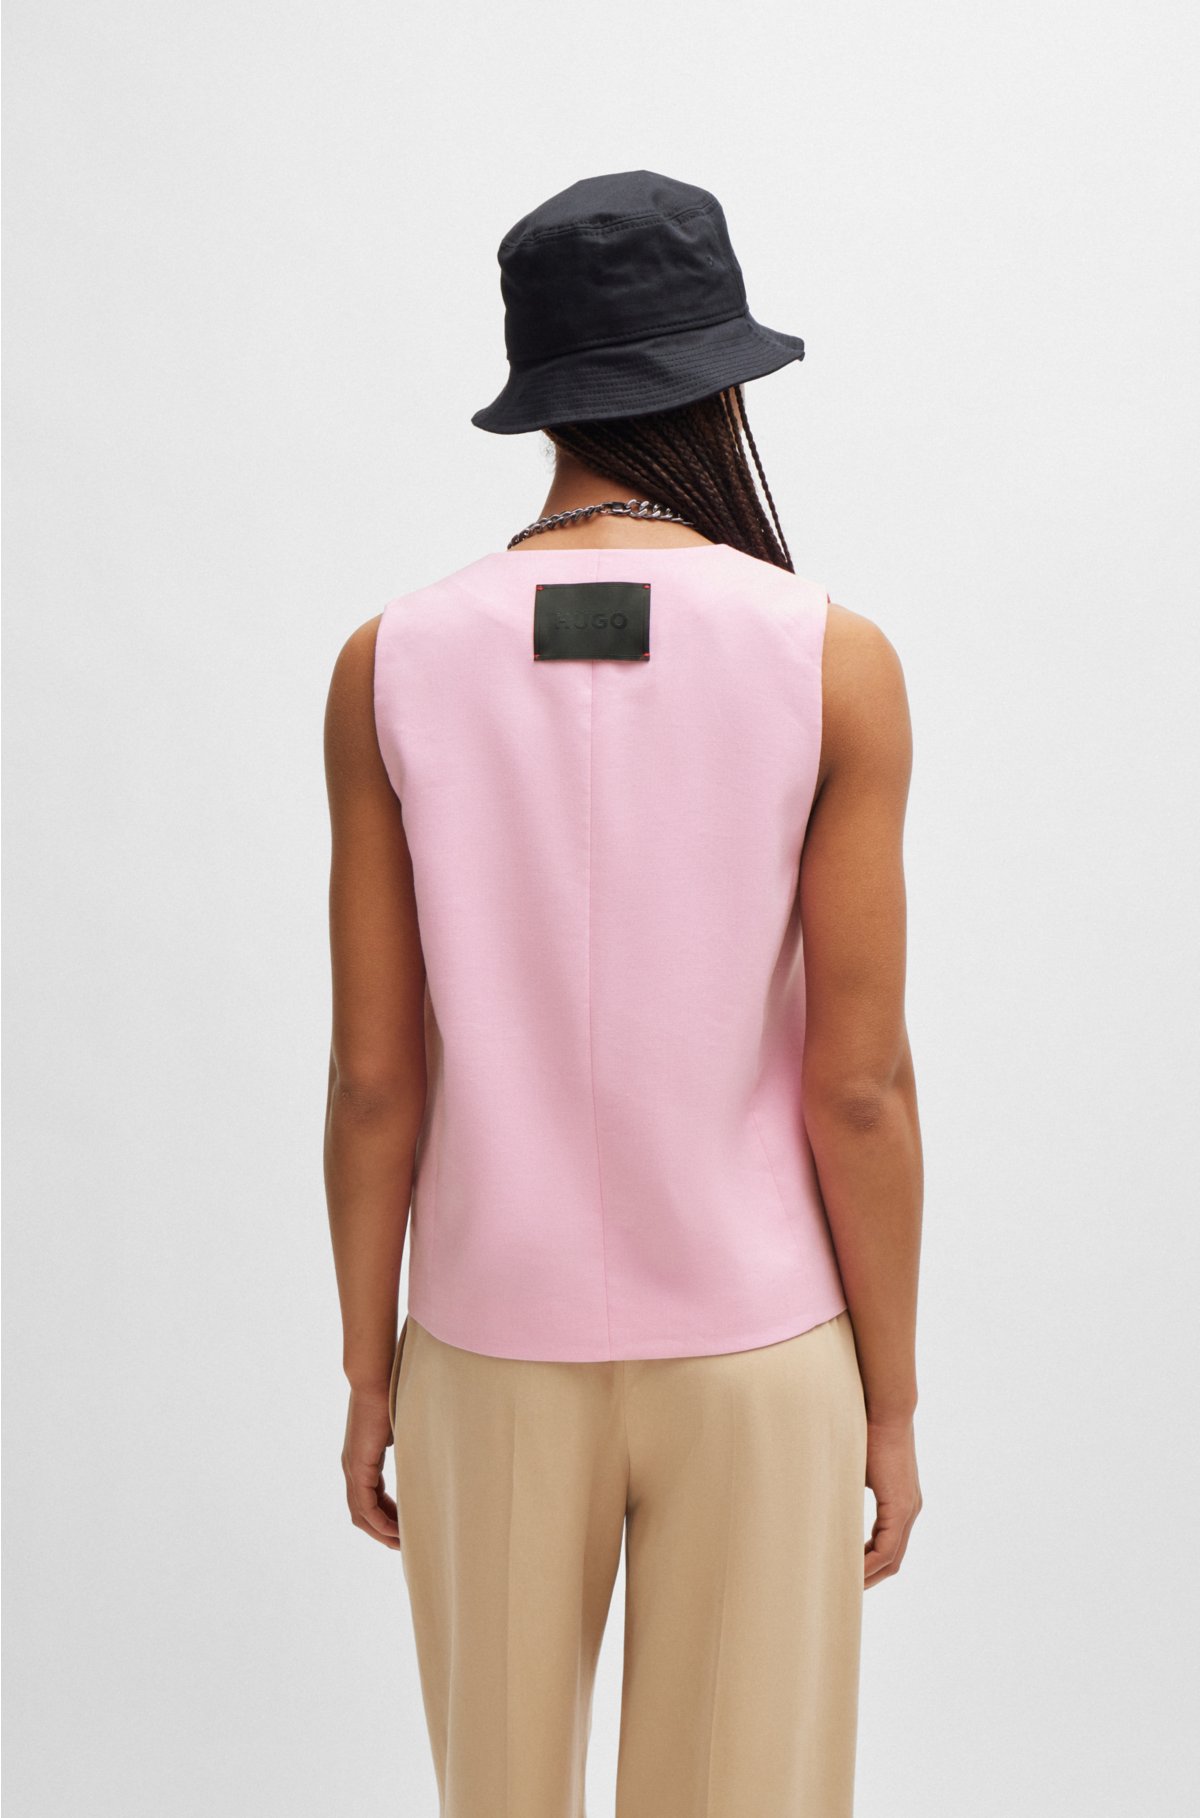 Oversized-fit waistcoat with signature lining, light pink